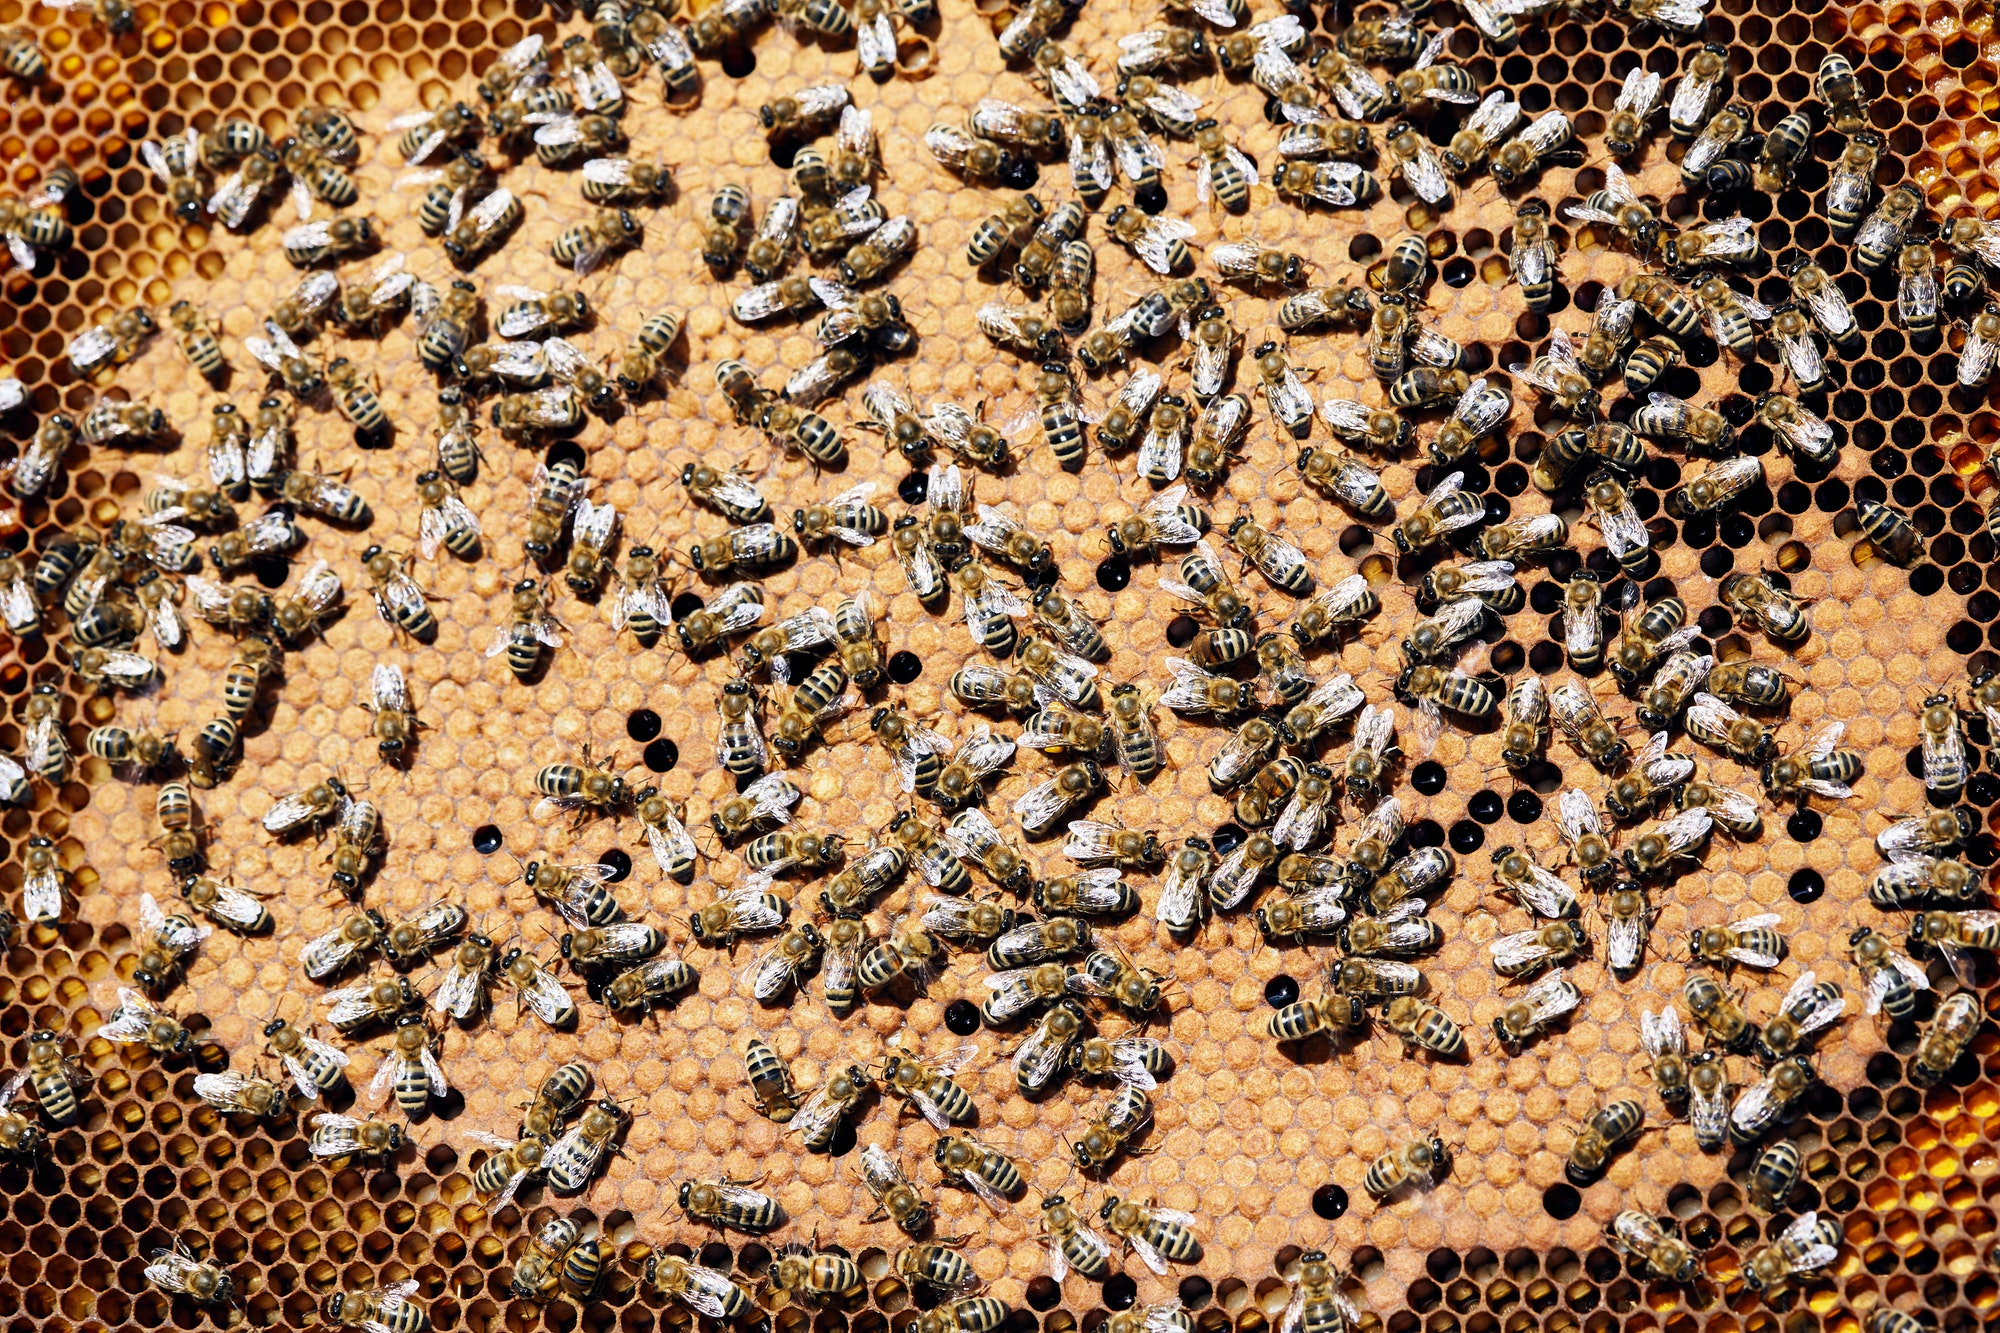 Honey Bees in Hive Close Up